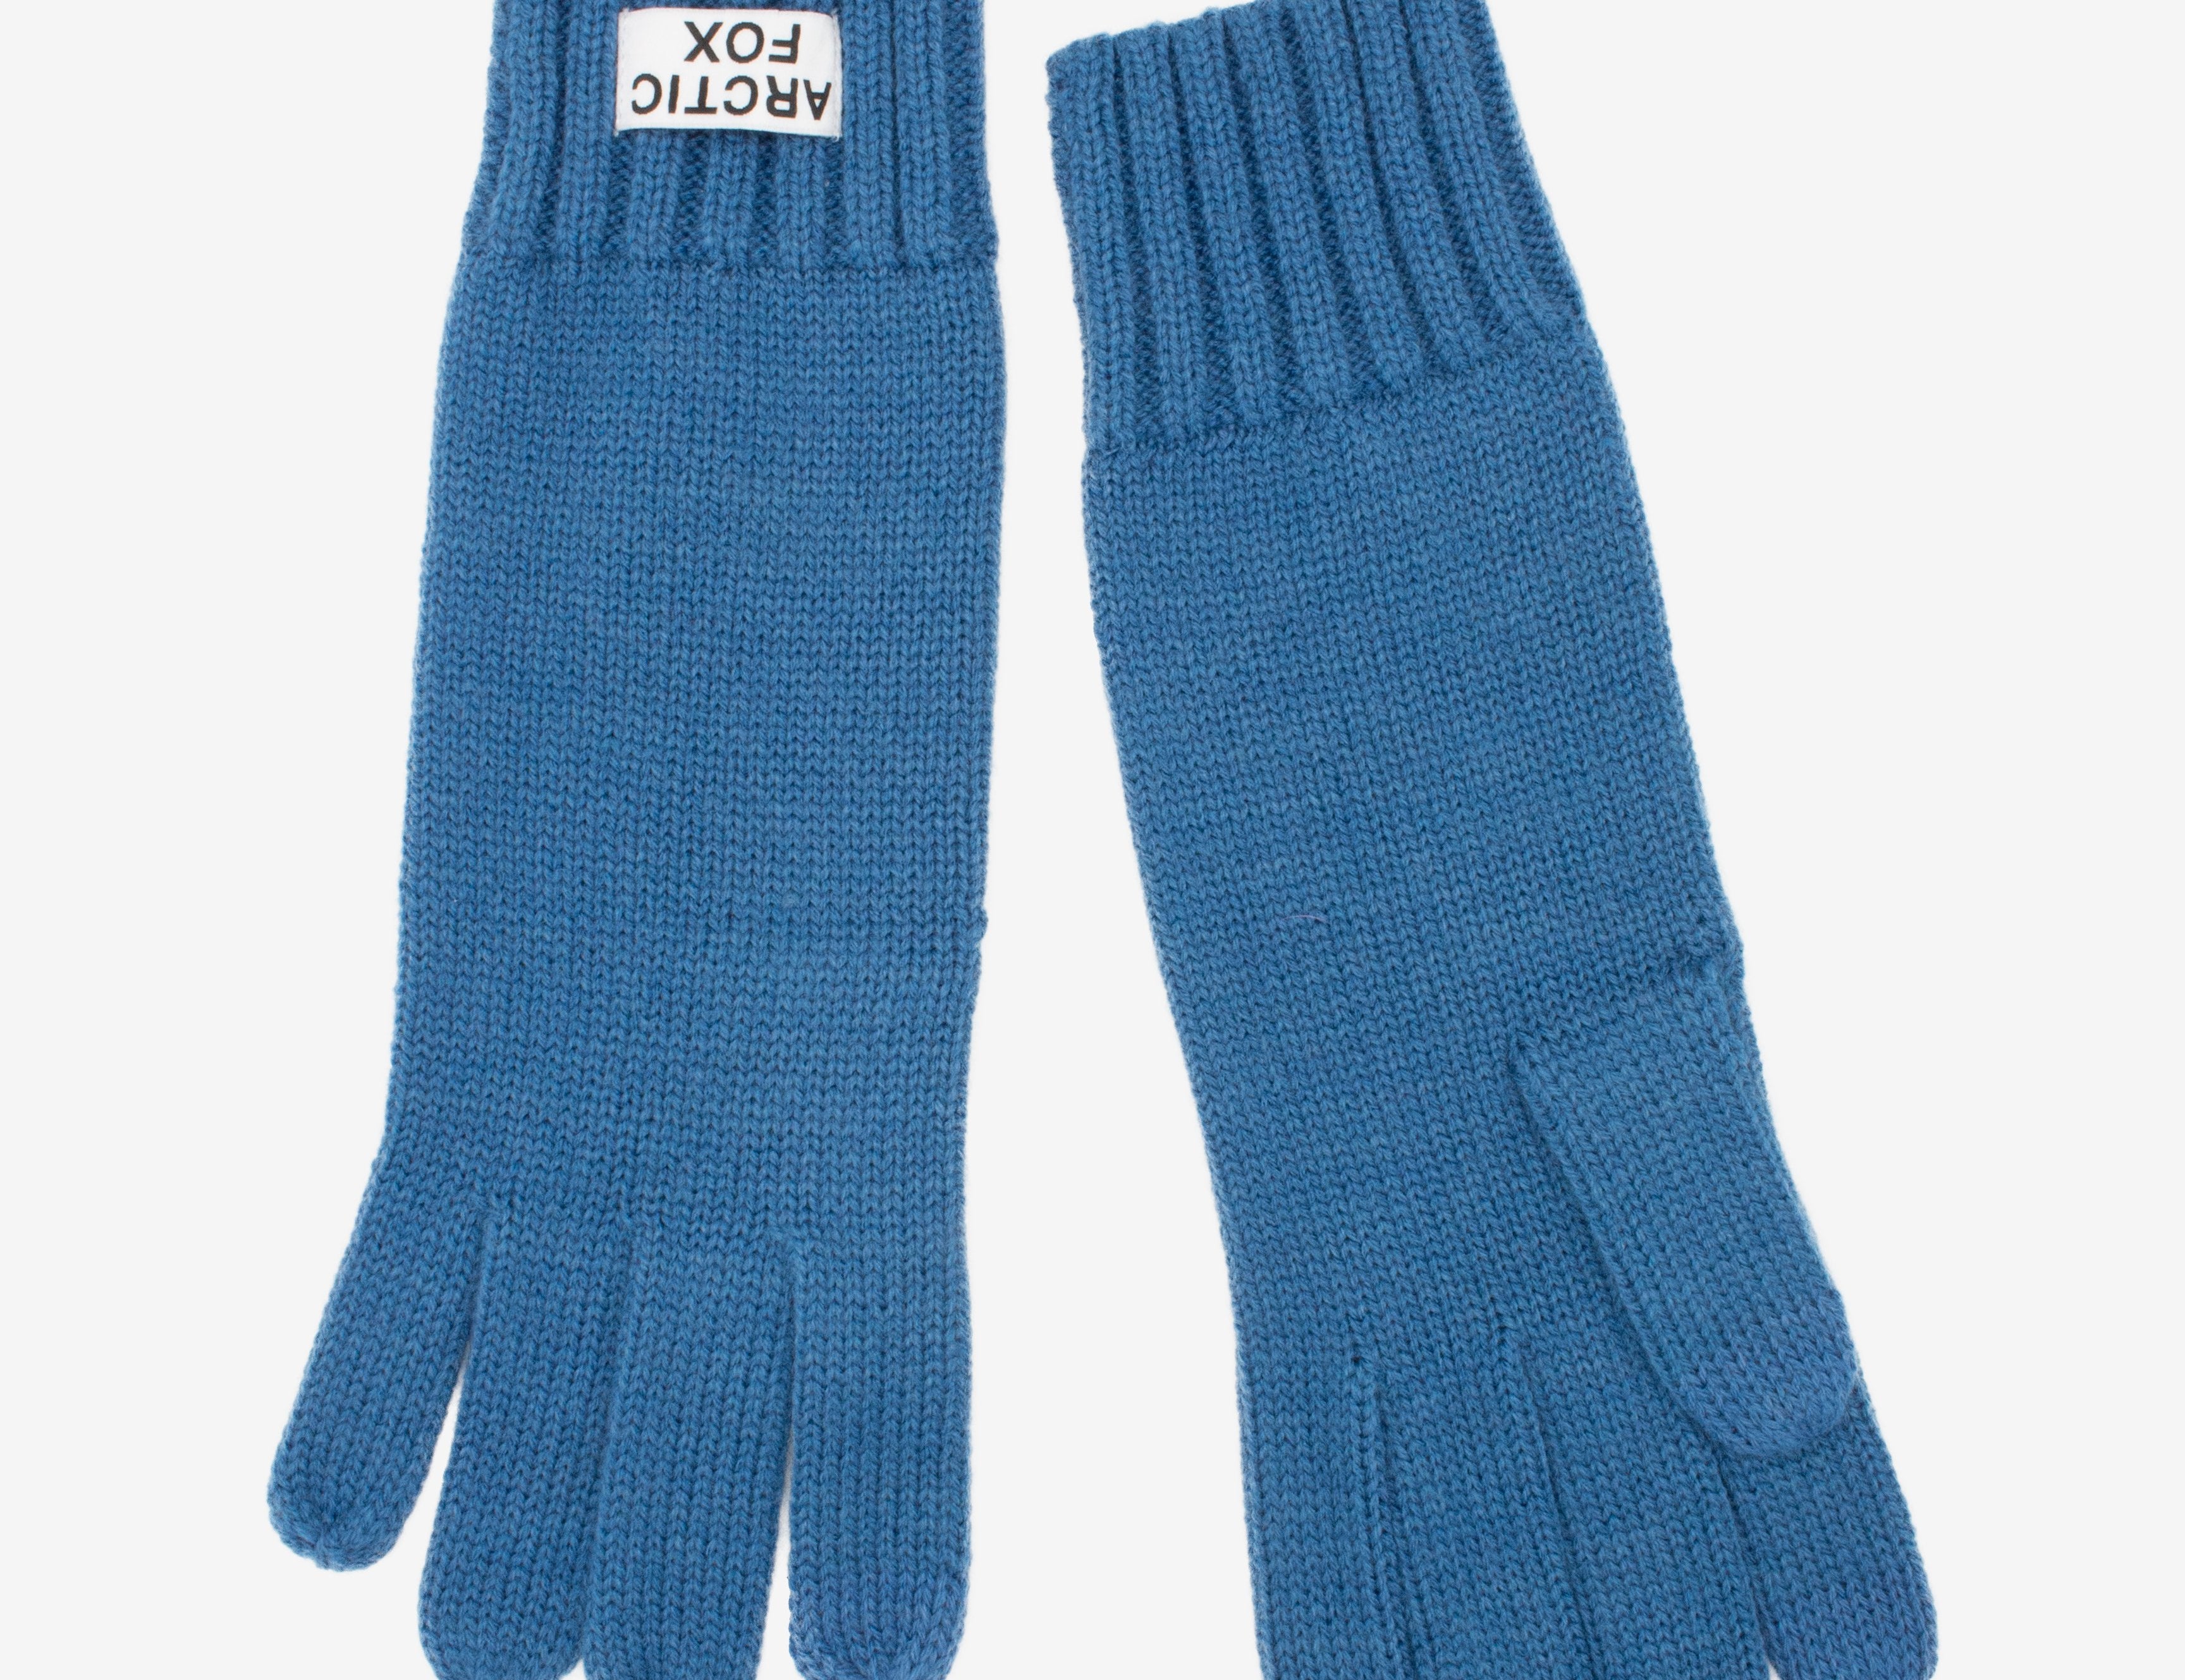 The Recycled Bottle Gloves